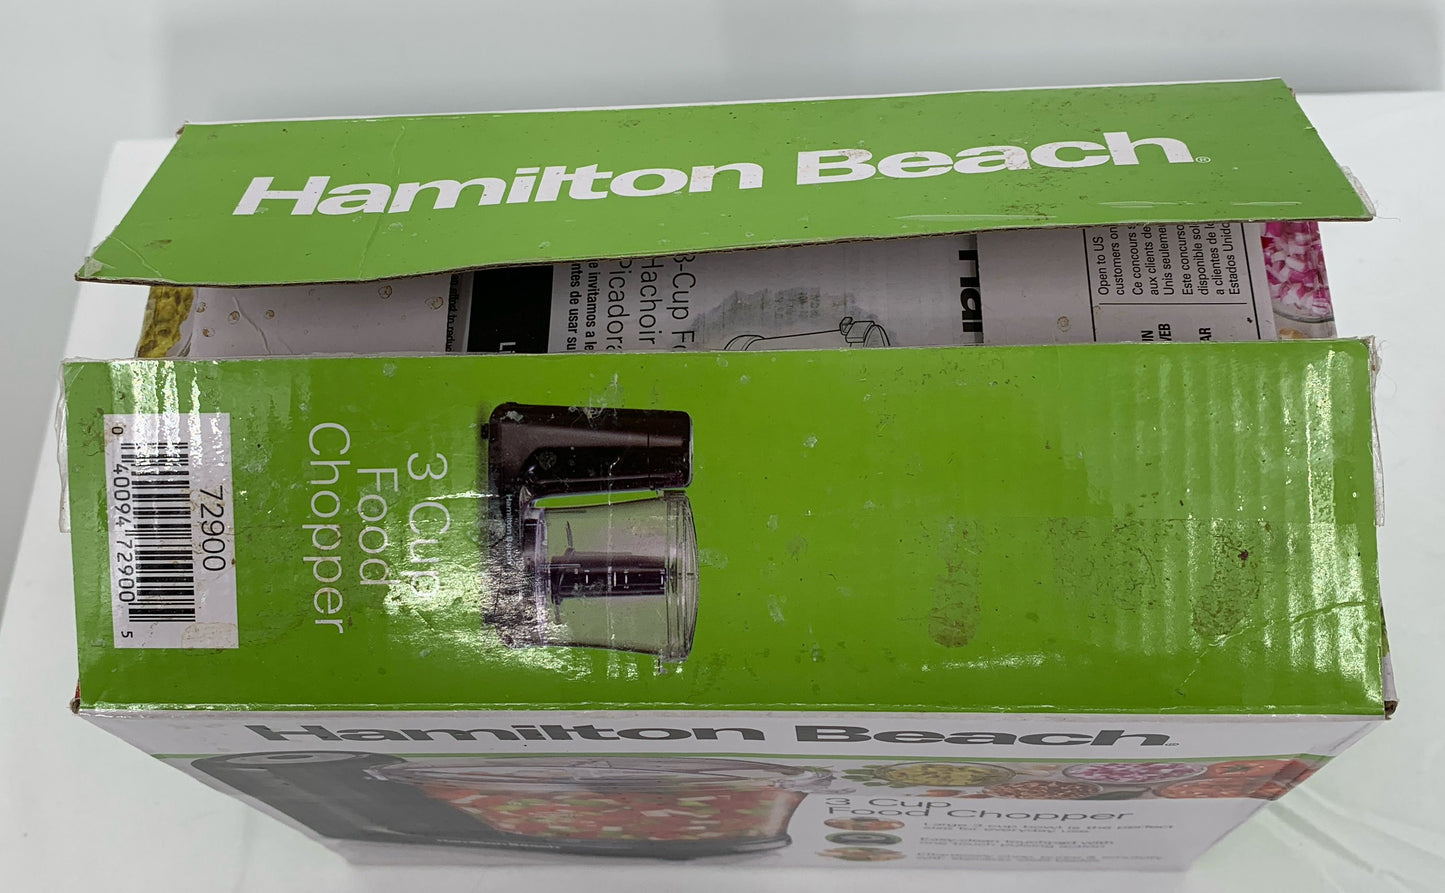 Hamilton Beach 3 Cup Food Chopper 72900 New Open Box With User's Manual